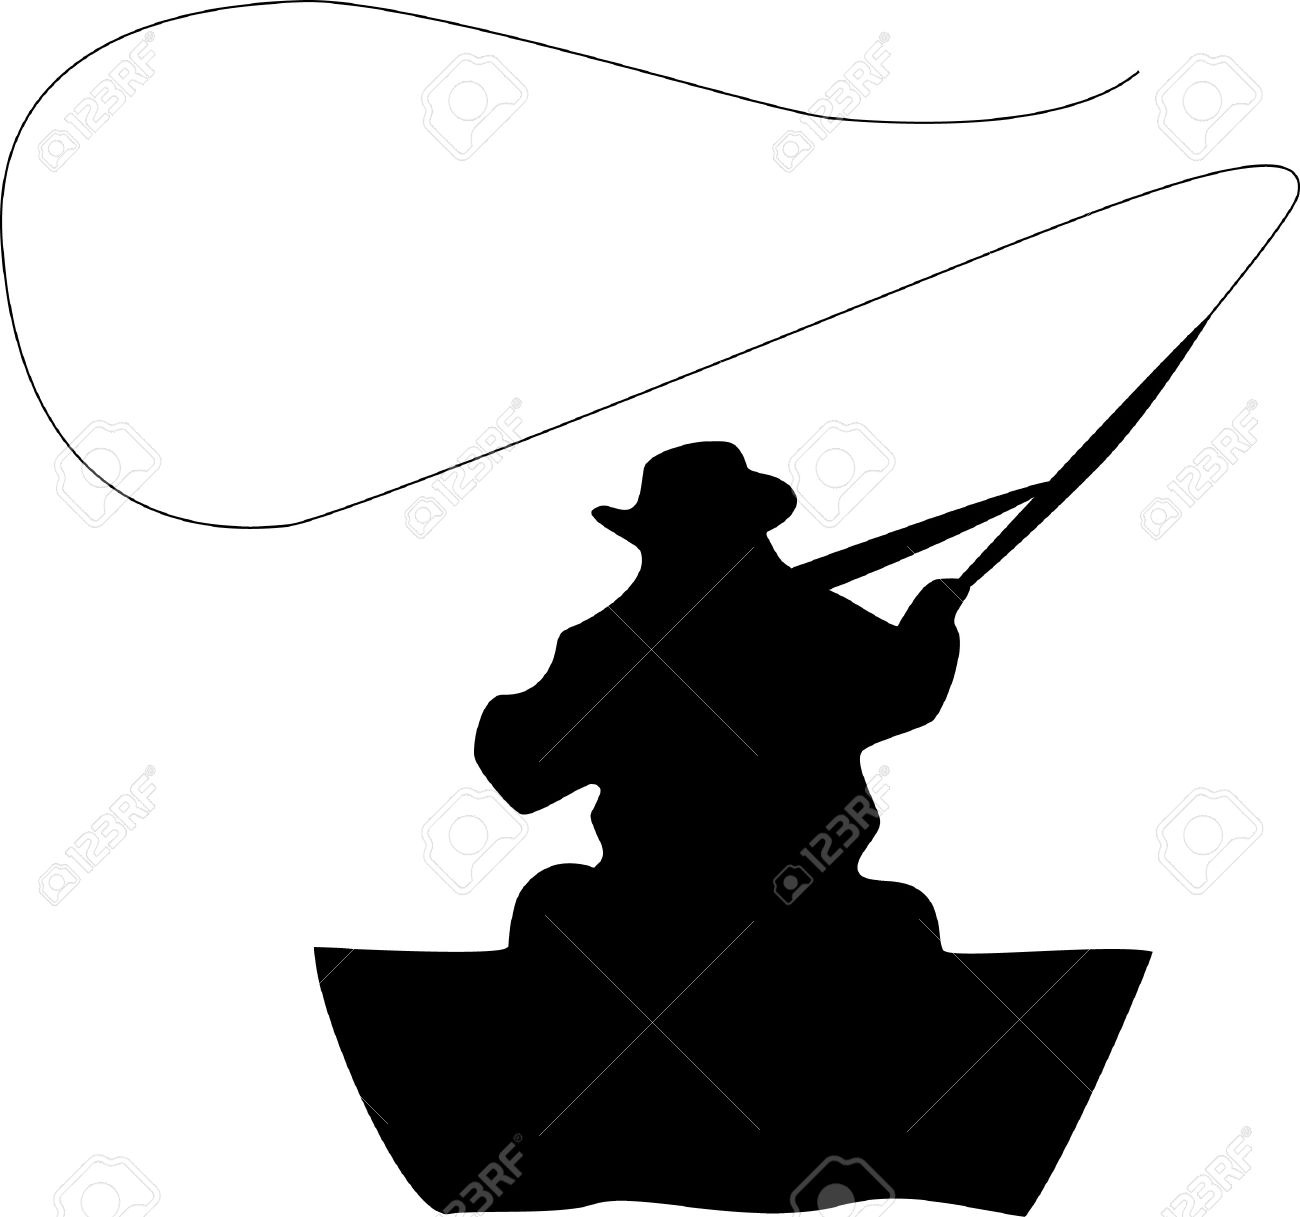 Boating clipart boat man. Silhouette clip art at